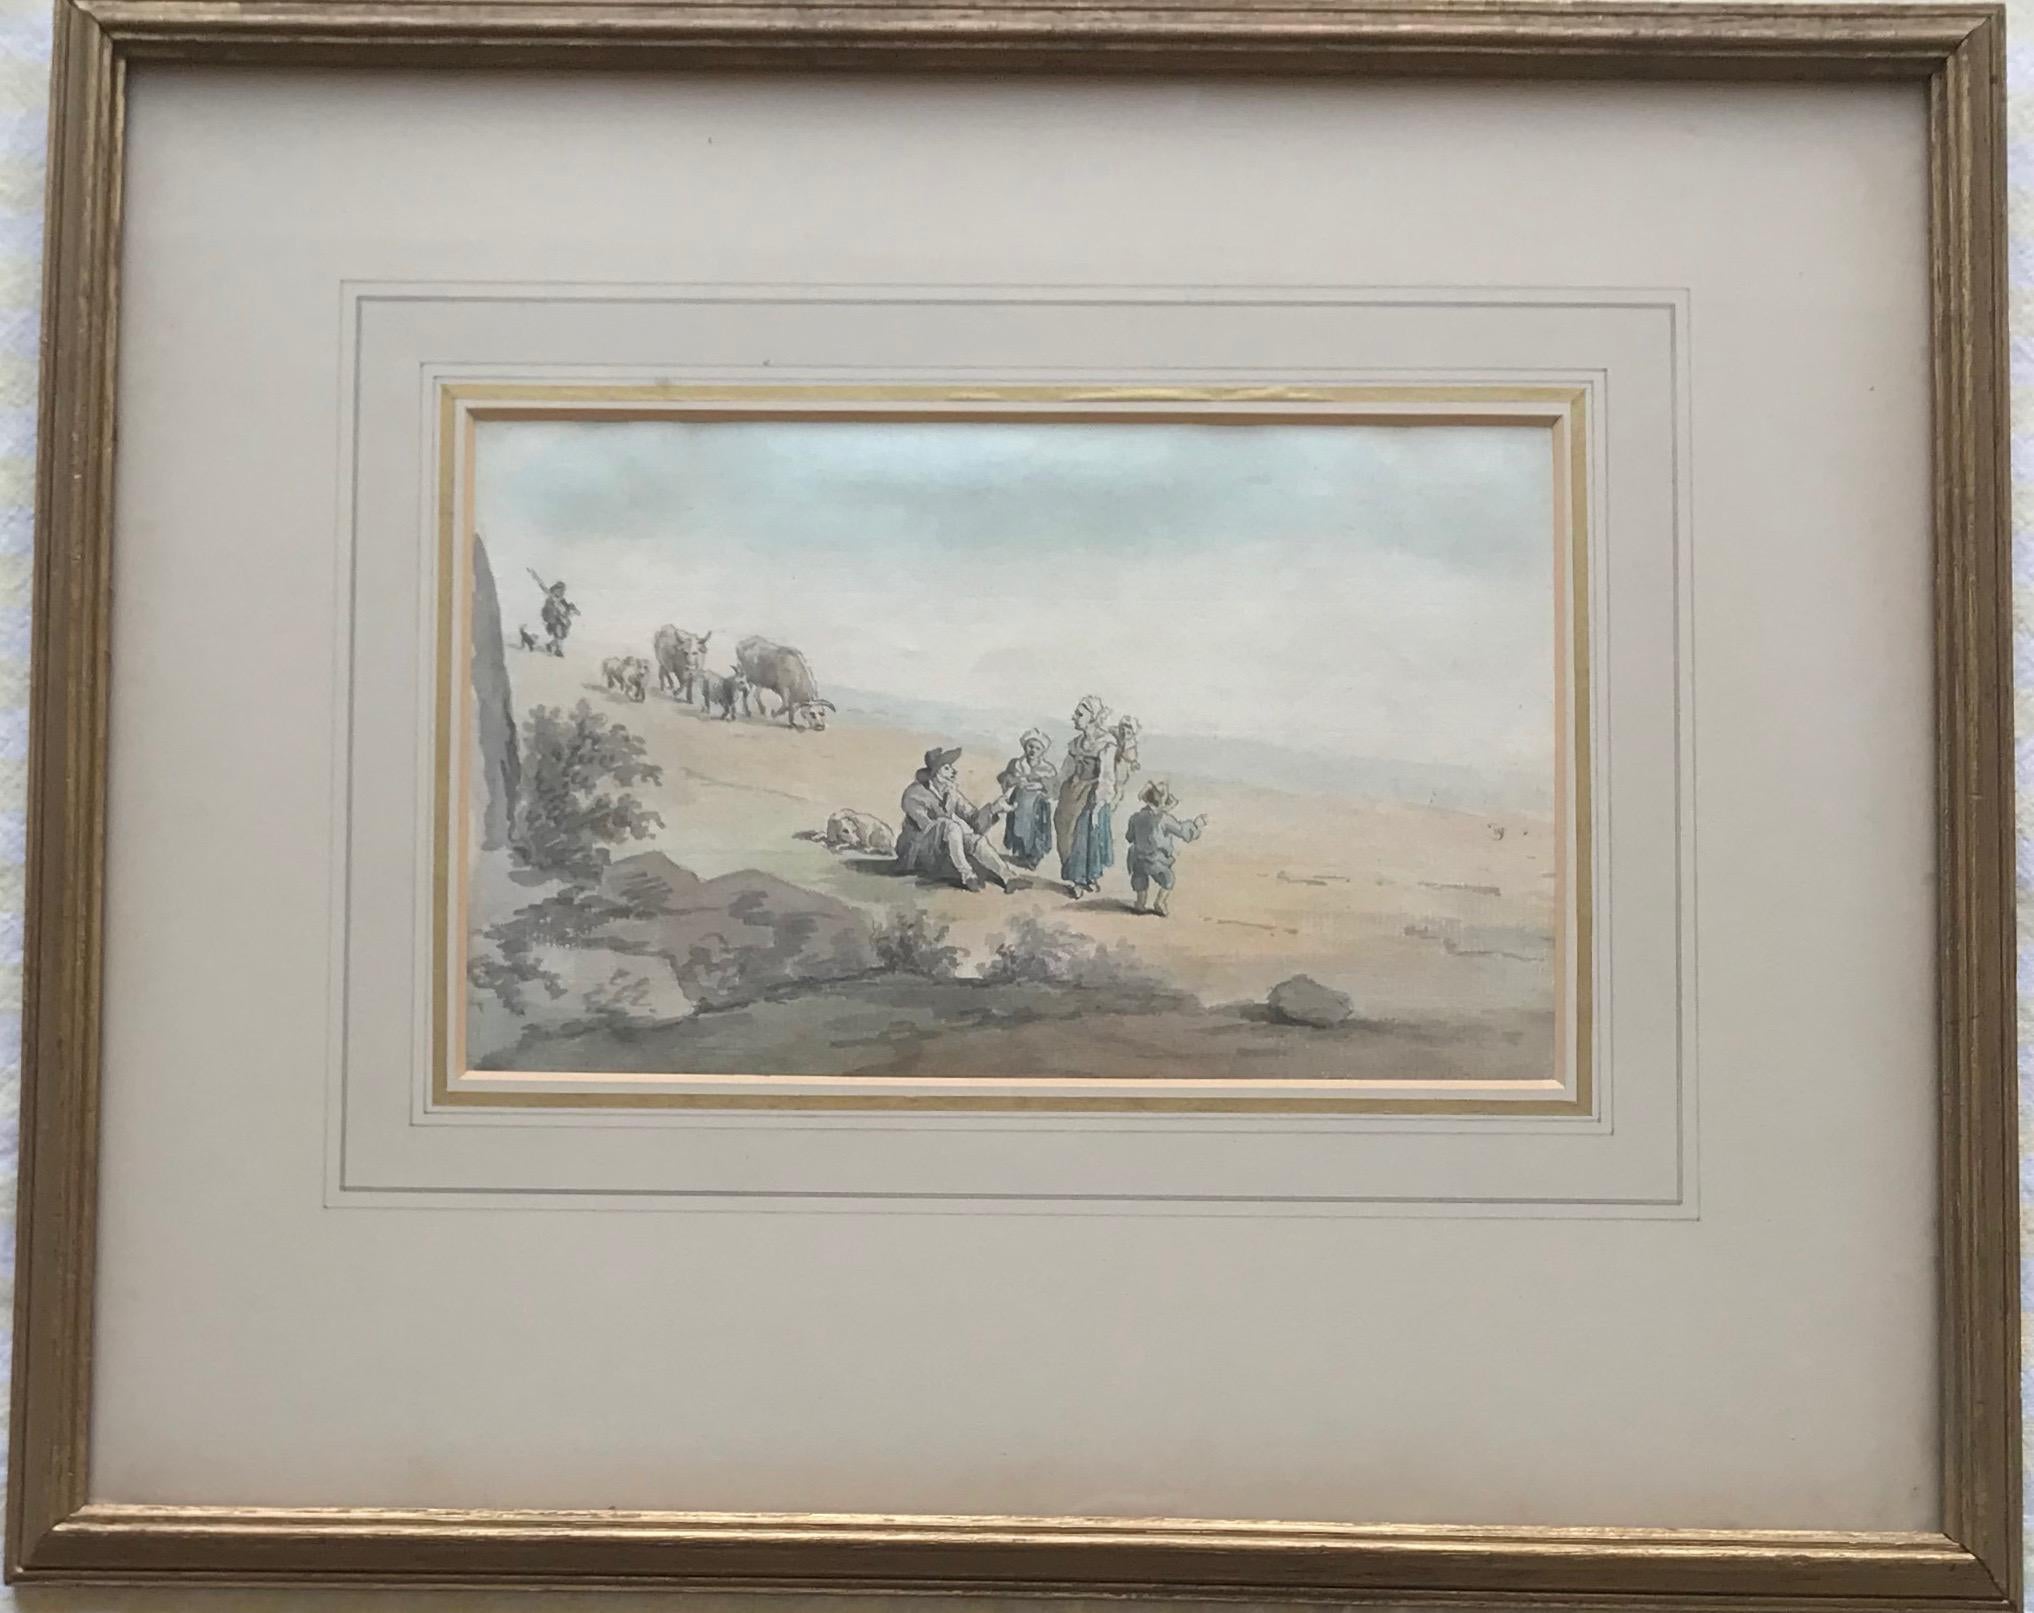 Attributed to Peter Le Cave, 18th Century watercolor on laid paper, rustic scene 2